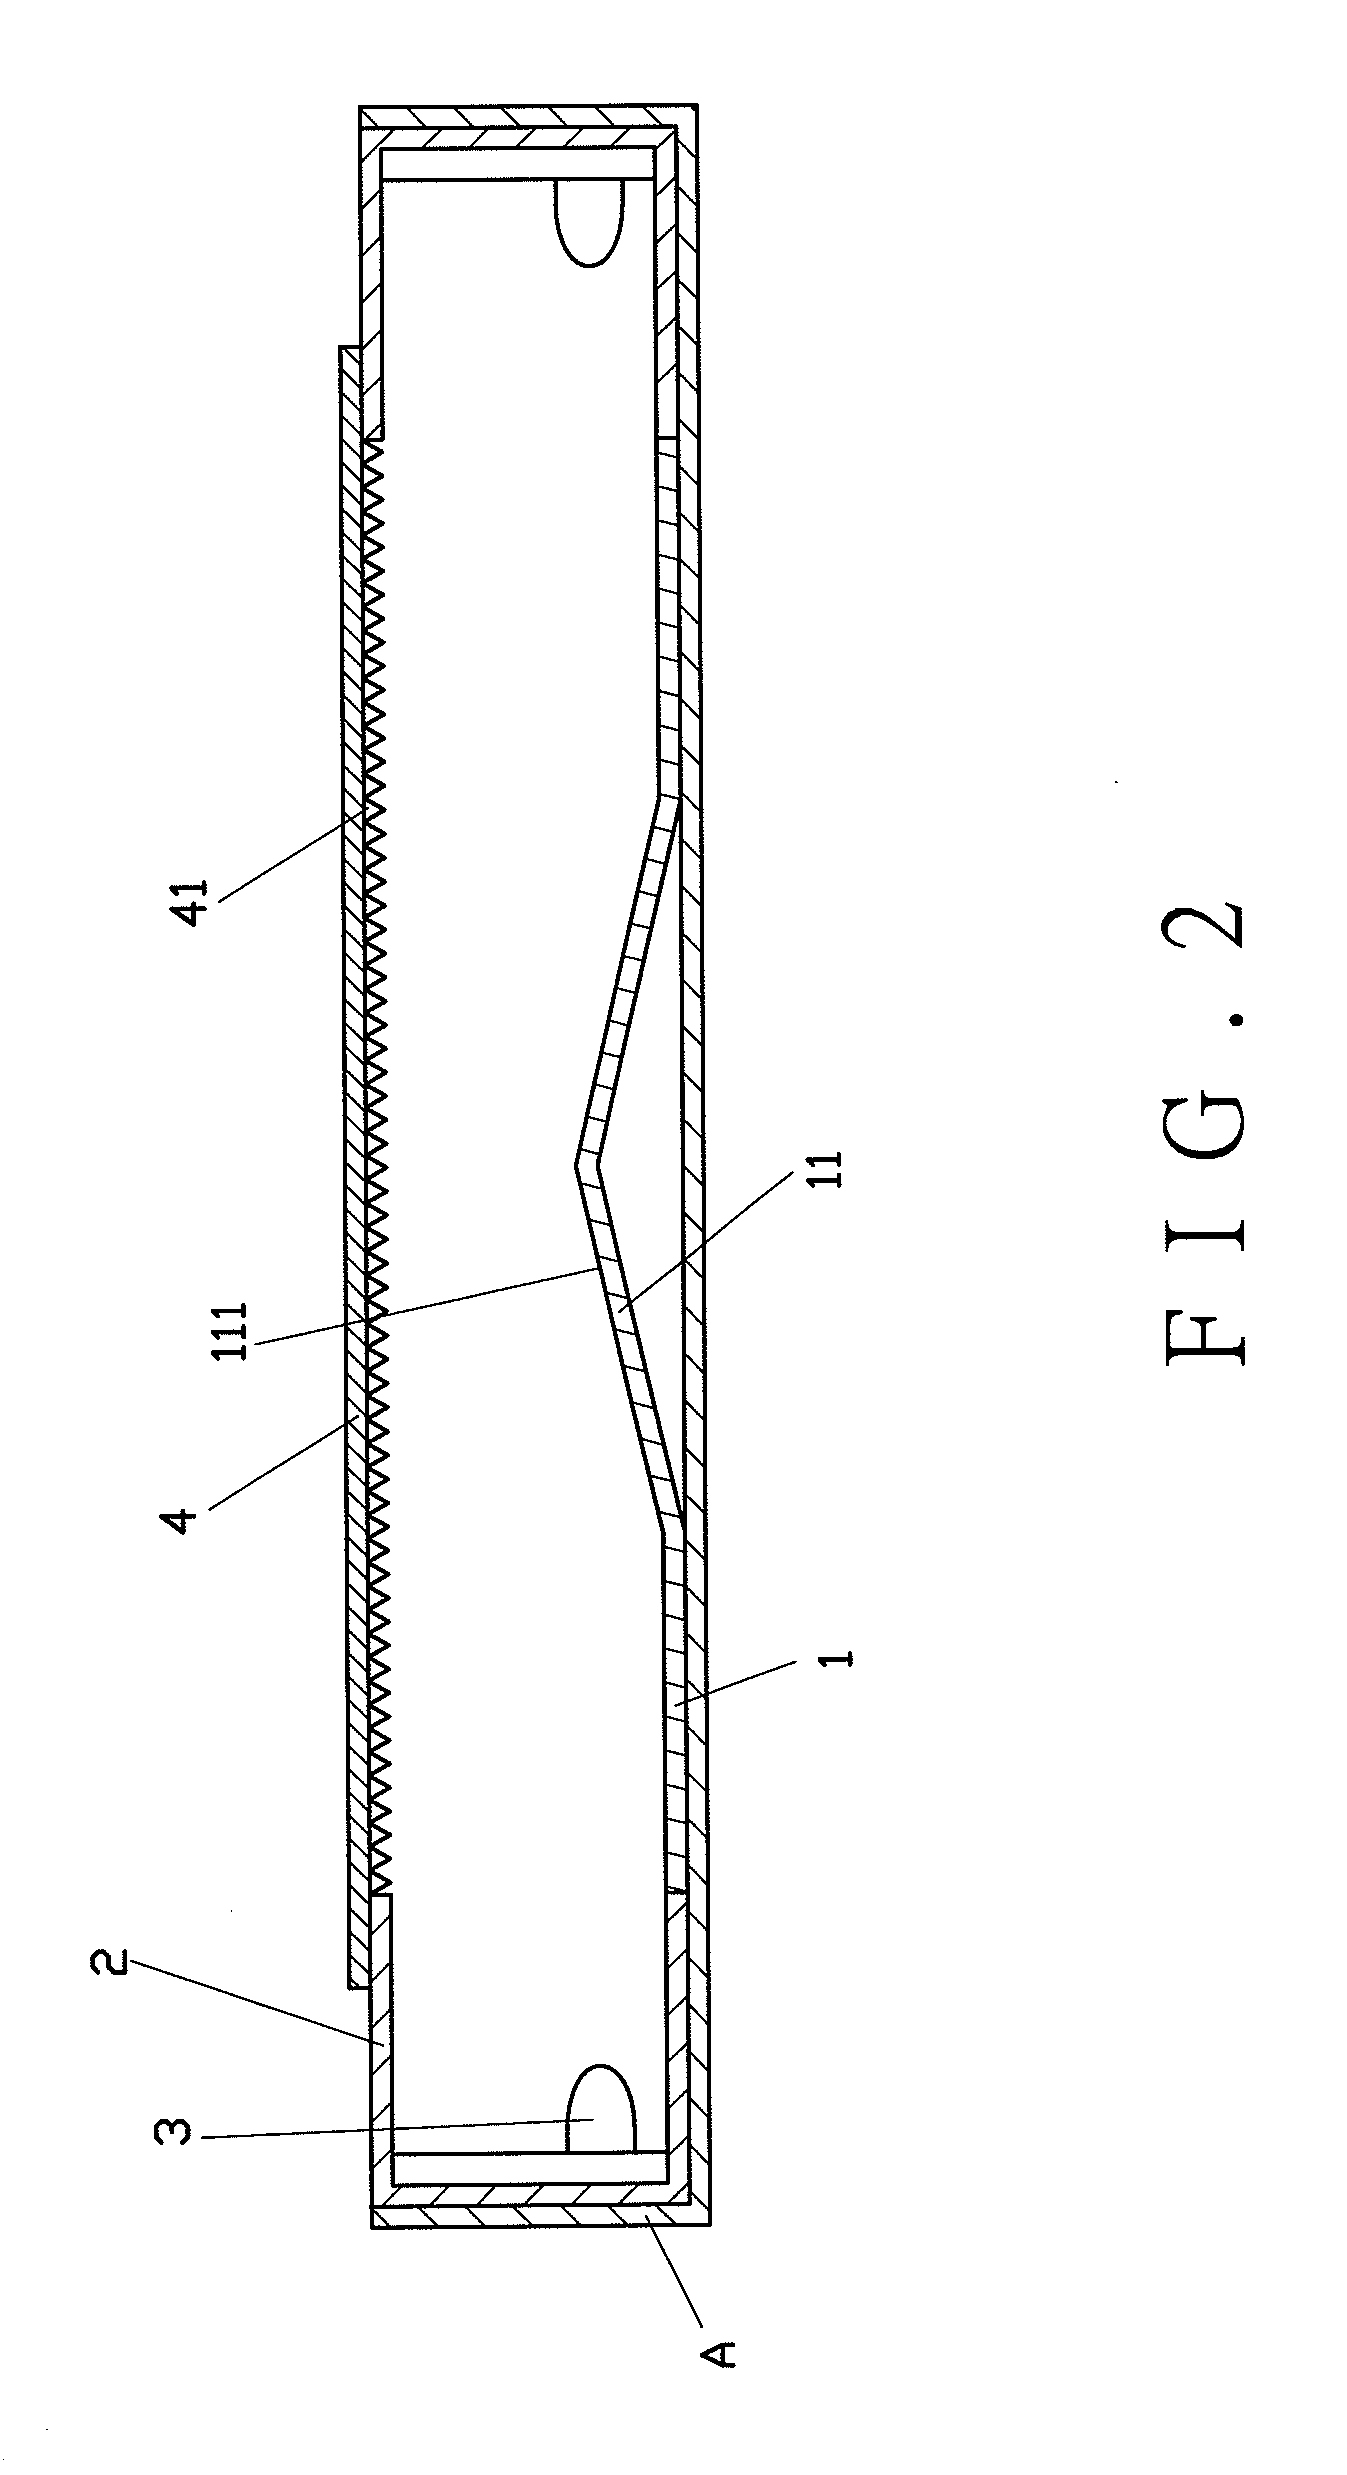 Radiation structure without light guiding board